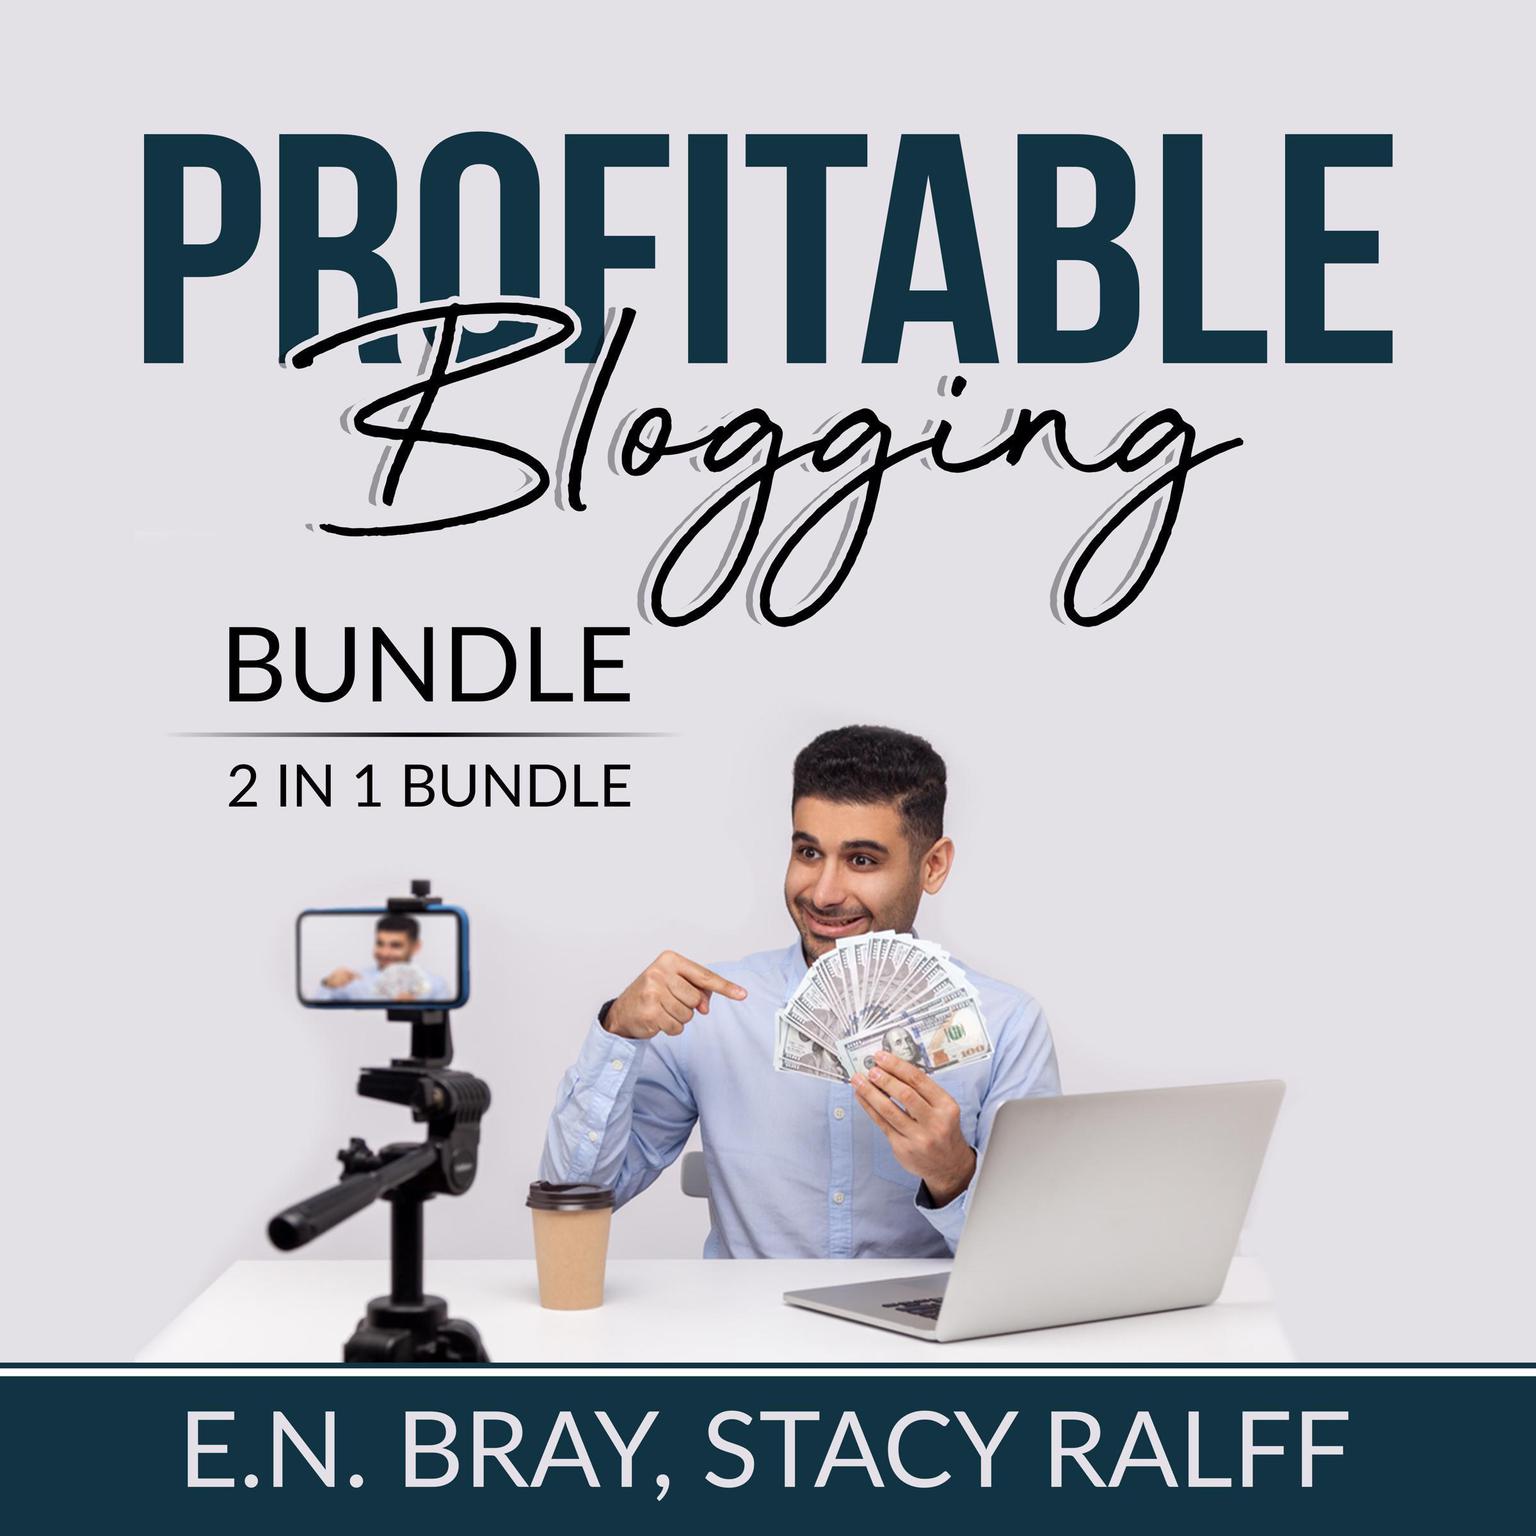 Profitable Blogging Bundle, 2 IN 1 Bundle: Make a Living With Blog Writing and Make Money From Blogging Audiobook, by E.N. Bray